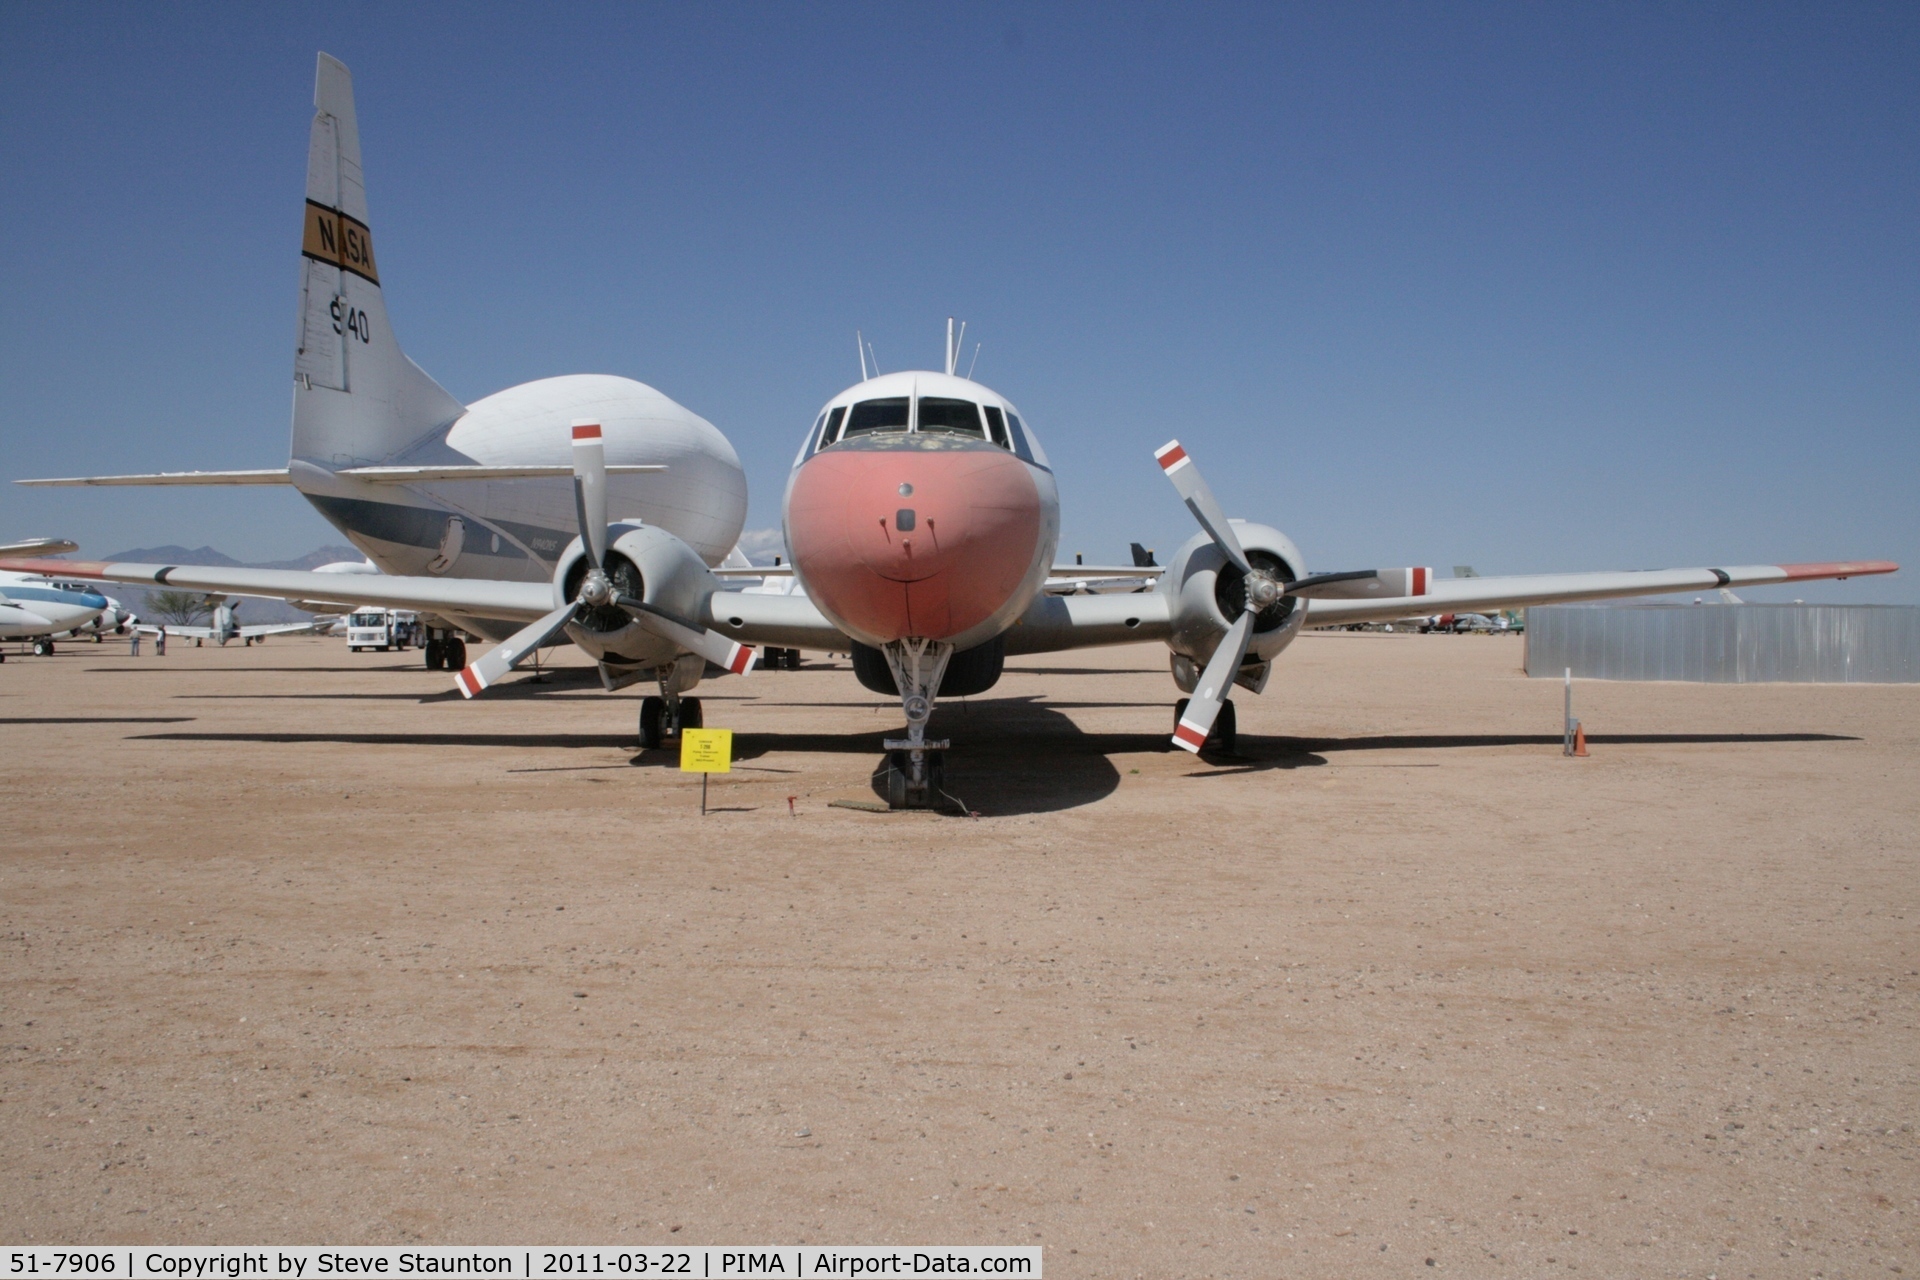 51-7906, 1951 Convair T-29B C/N 240-318, Taken at Pima Air and Space Museum, in March 2011 whilst on an Aeroprint Aviation tour